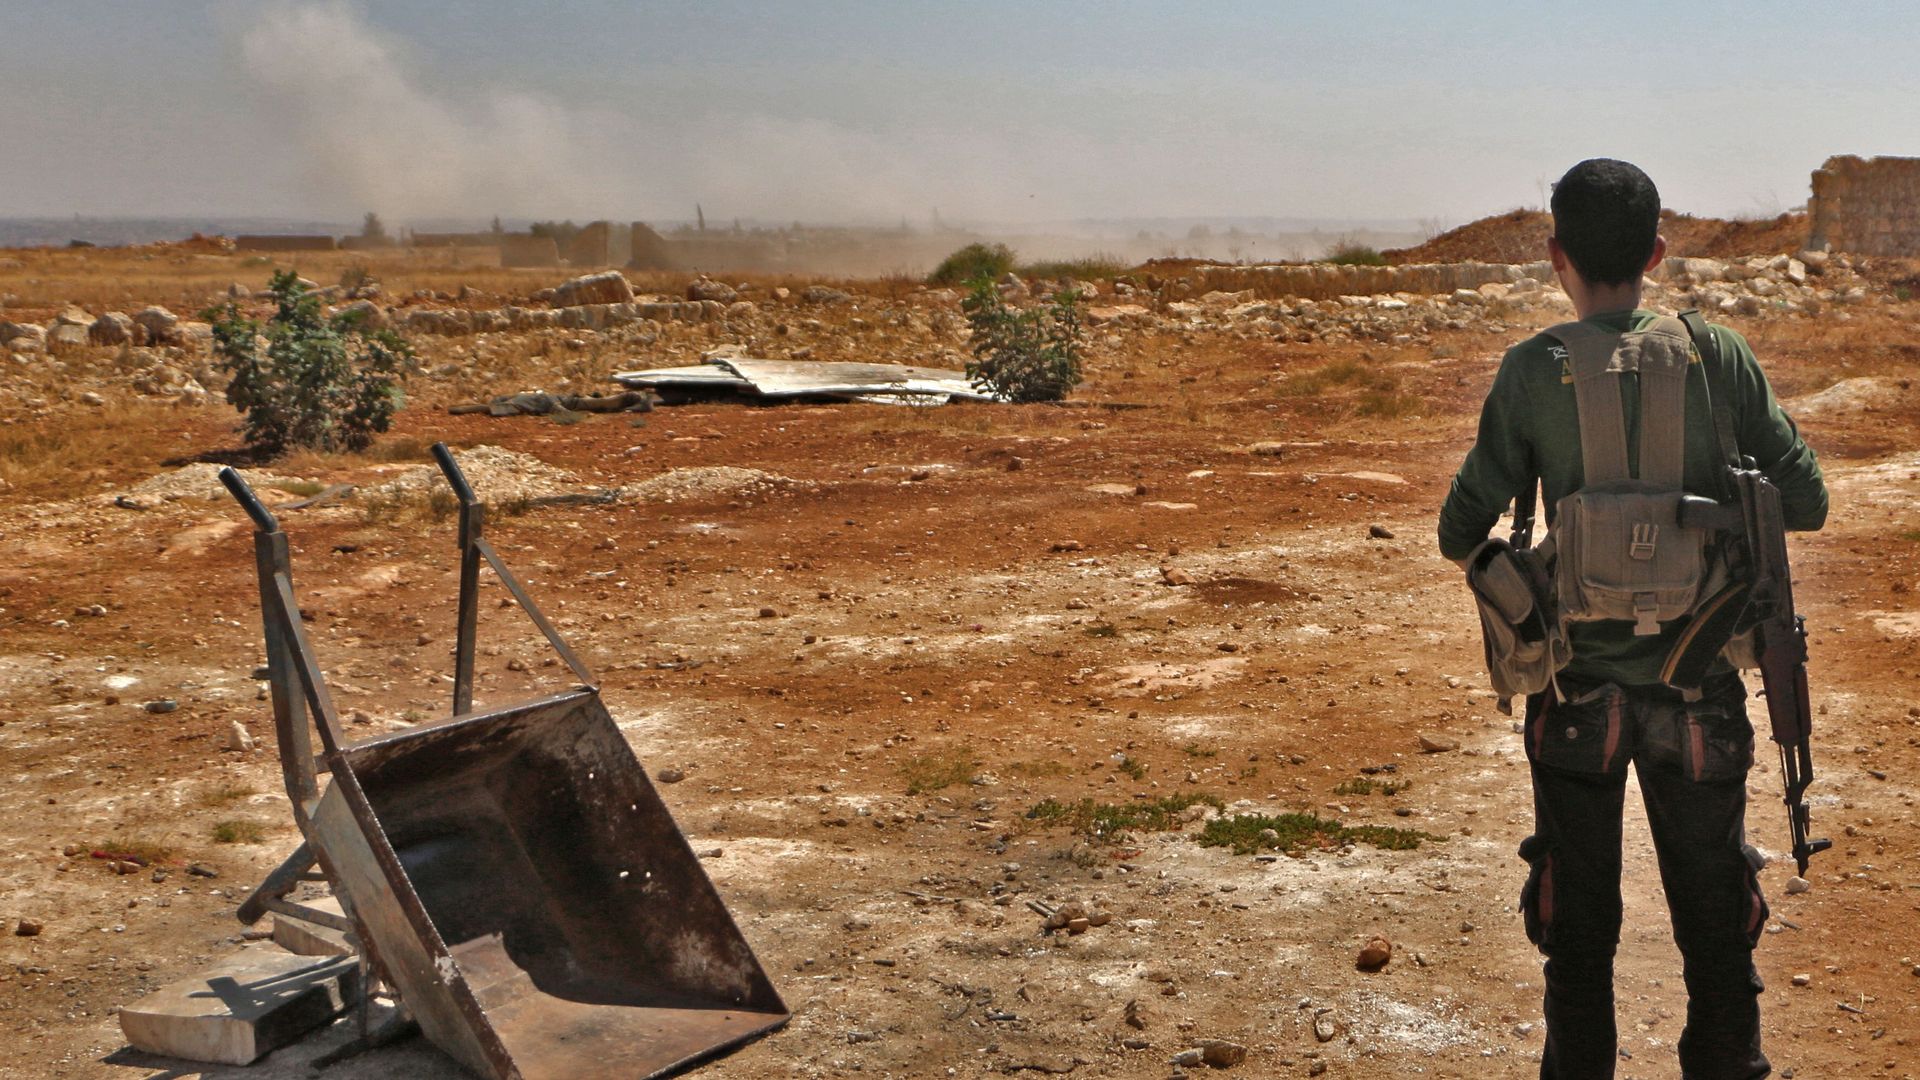 A Syrian rebel fighter holding a gun looks out onto empty land.